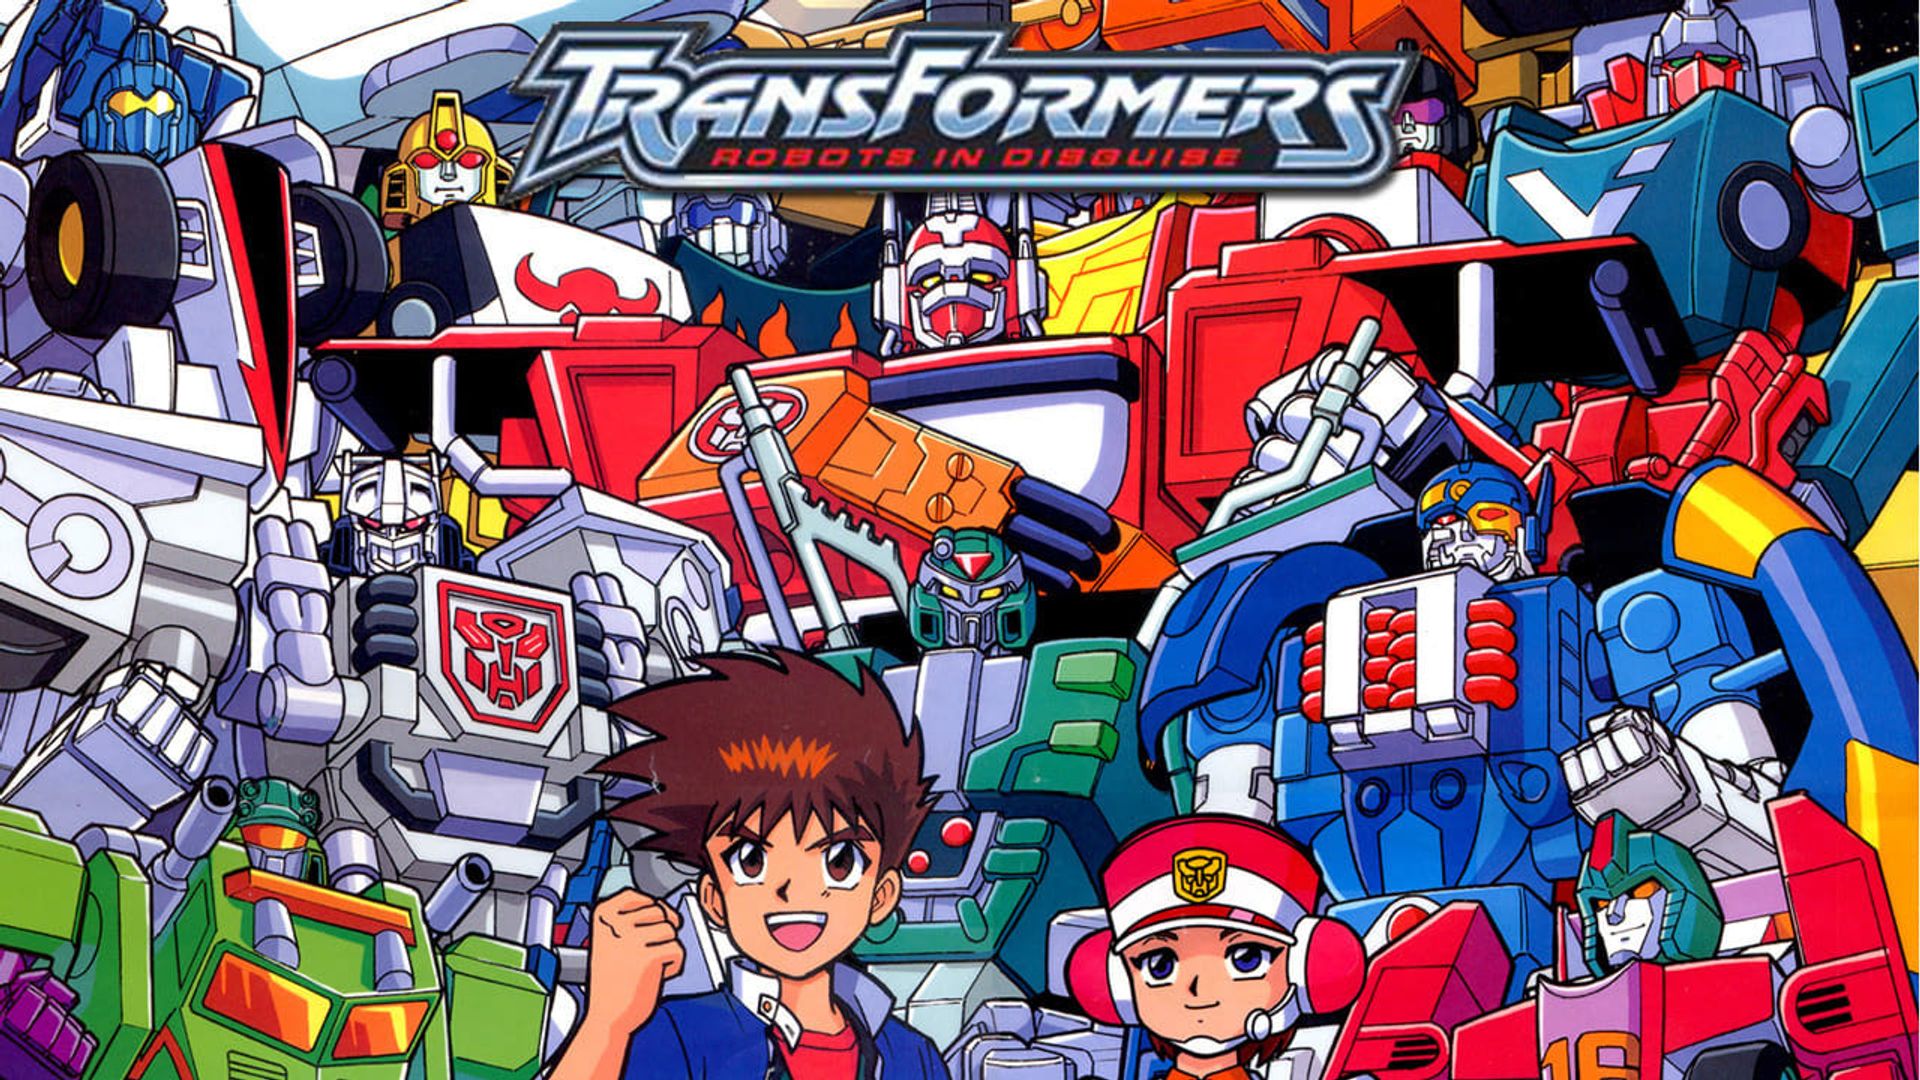 Transformers: Robots in Disguise background